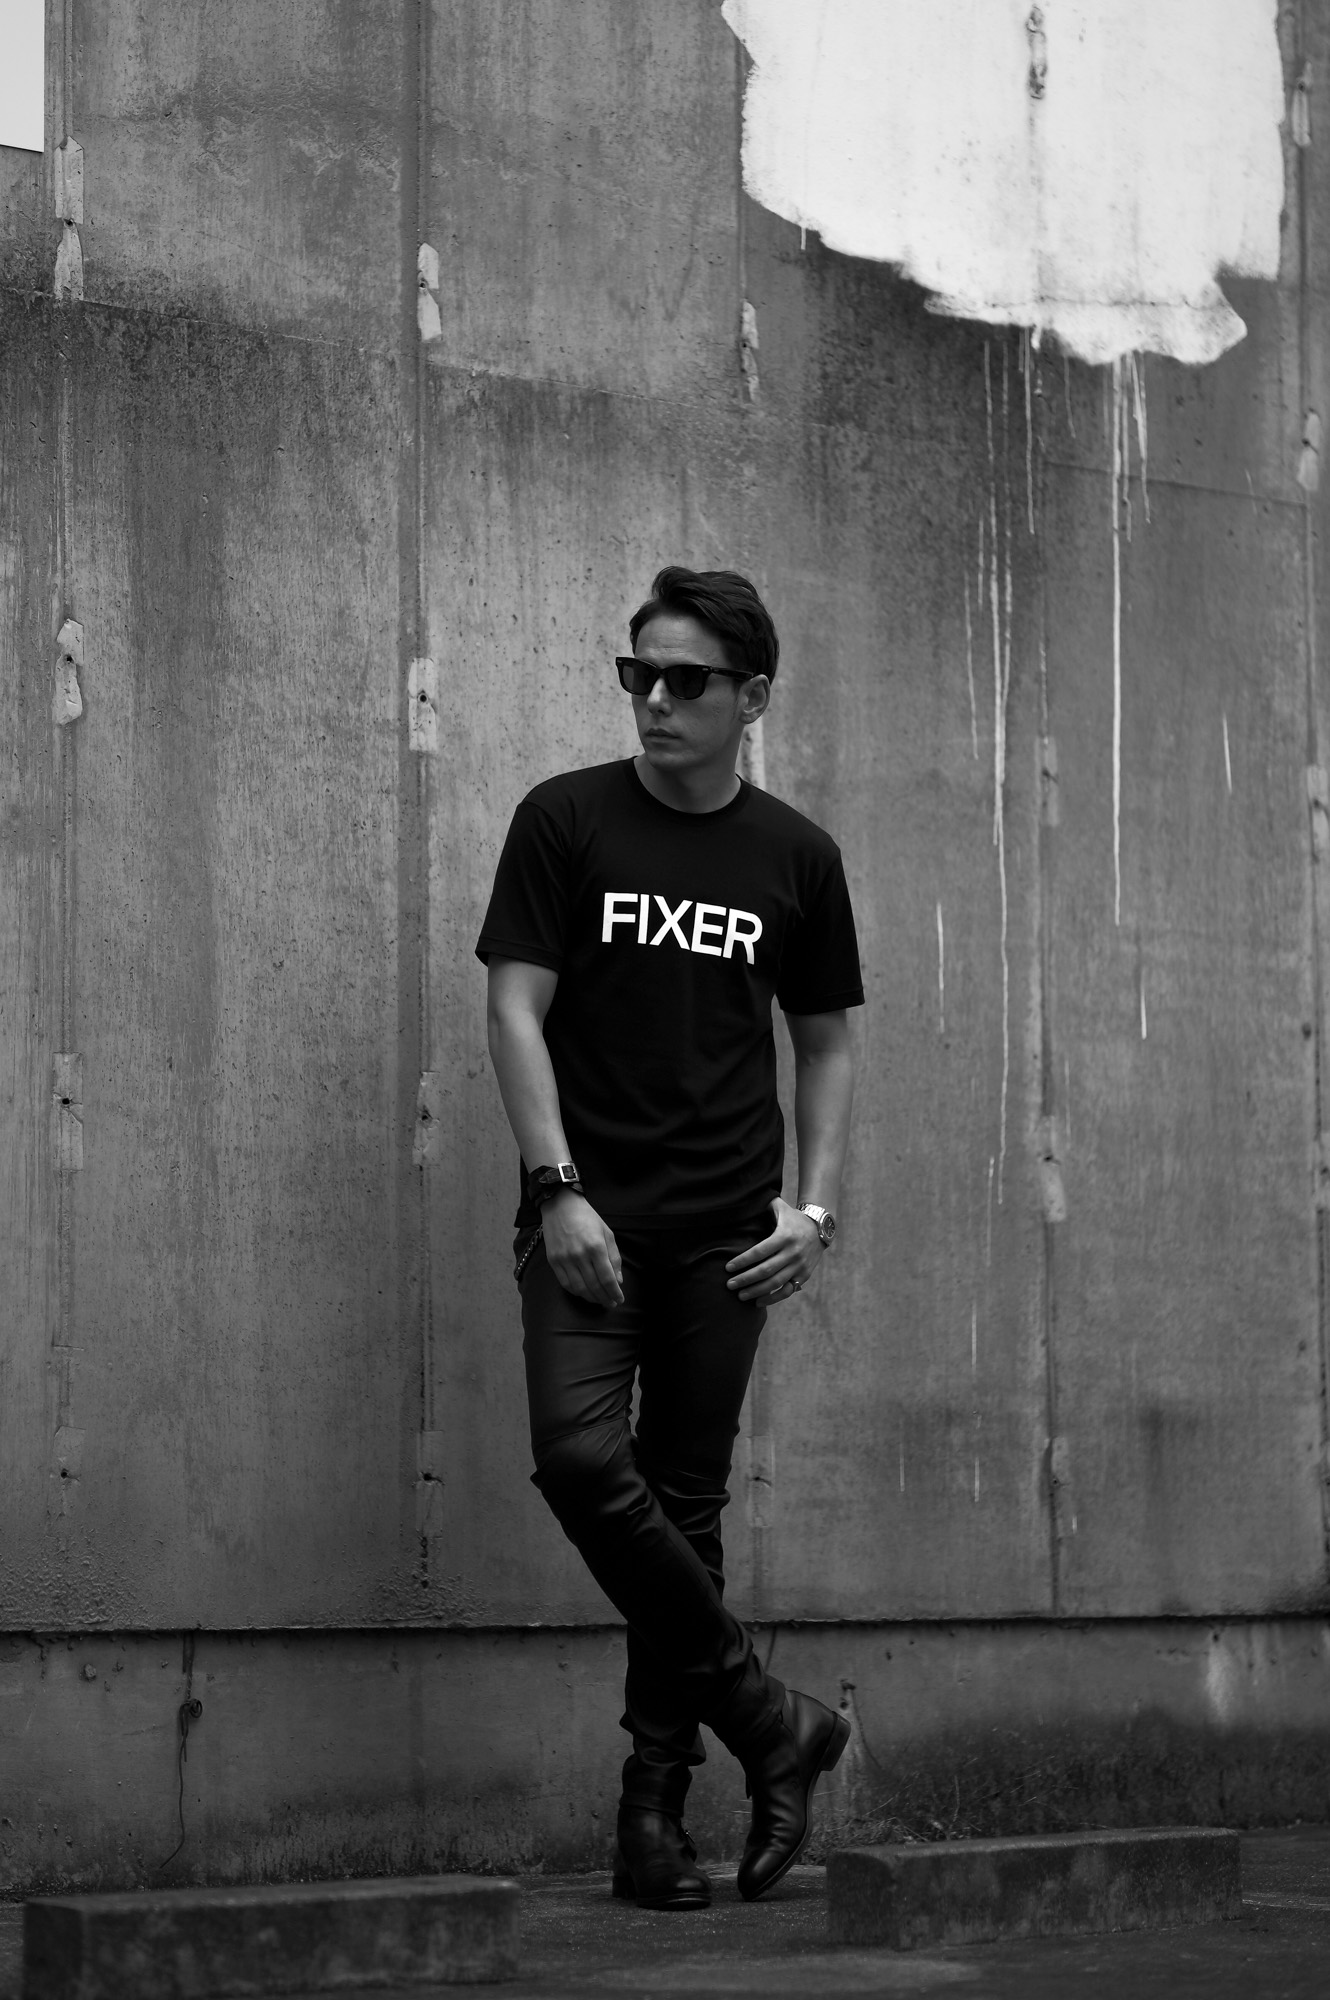 FIXER FTS-02 Print Crew Neck T-shirt BLACK 【Special Model】【東京限定】フィクサー プリントTシャツ ブラック ホワイトロゴ 愛知 名古屋 Alto e Diritto altoediritto アルトエデリット